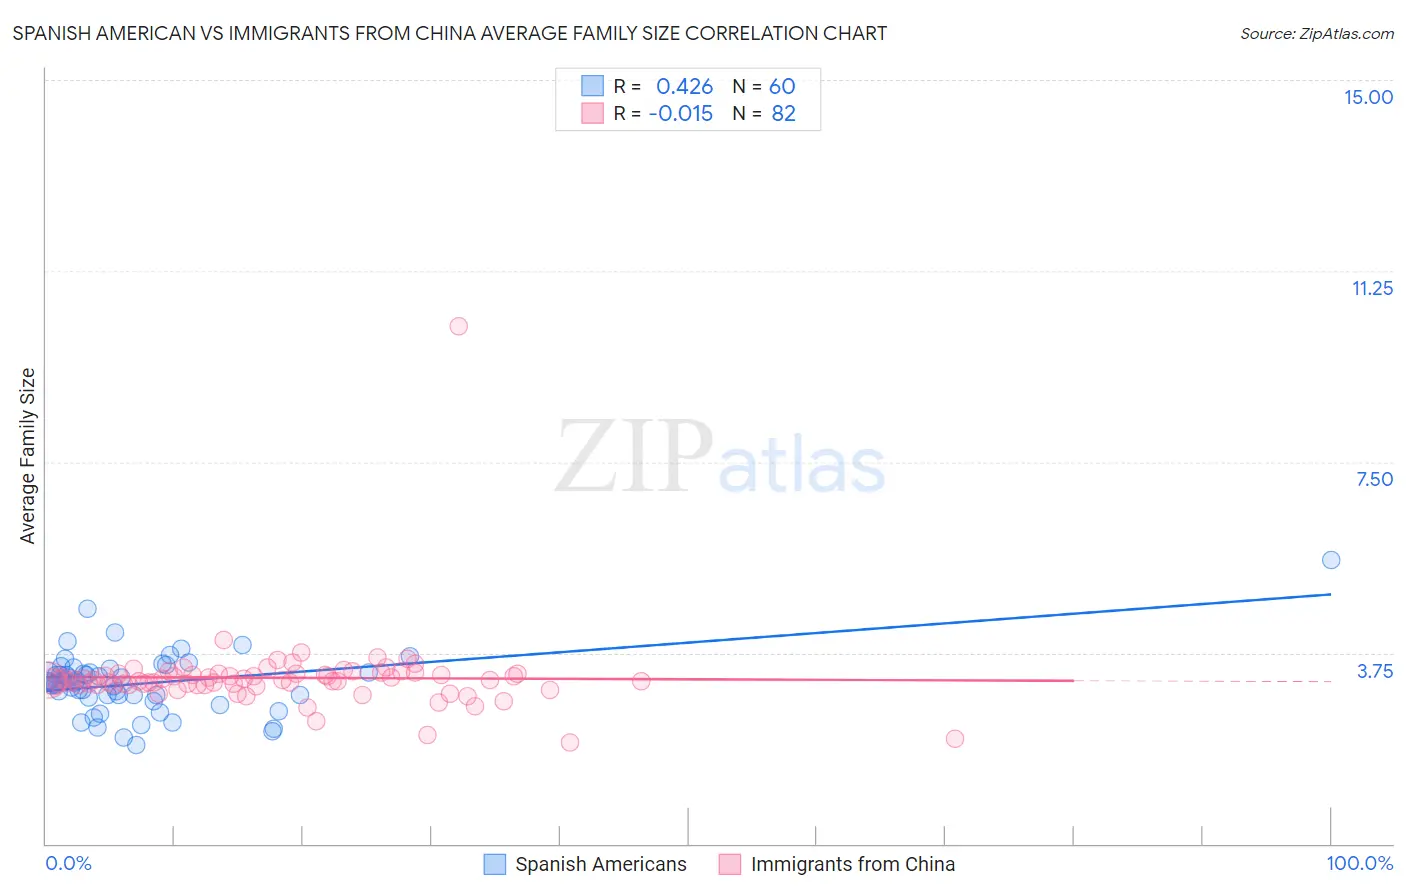 Spanish American vs Immigrants from China Average Family Size